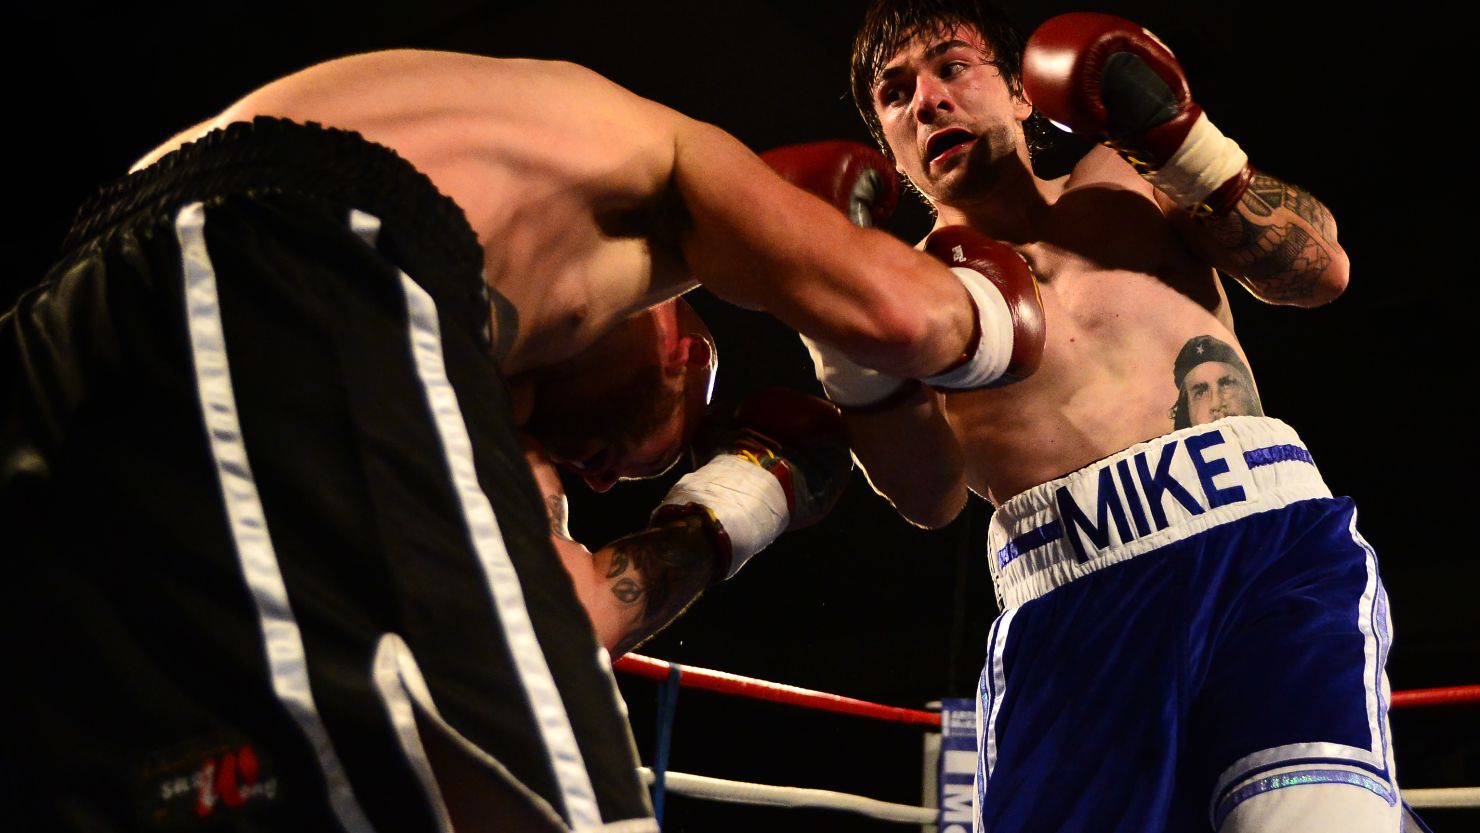 Boxer Mike Towell, right, takes on Danny Little in a 2015 welterweight match in Glasgow, Scotland.